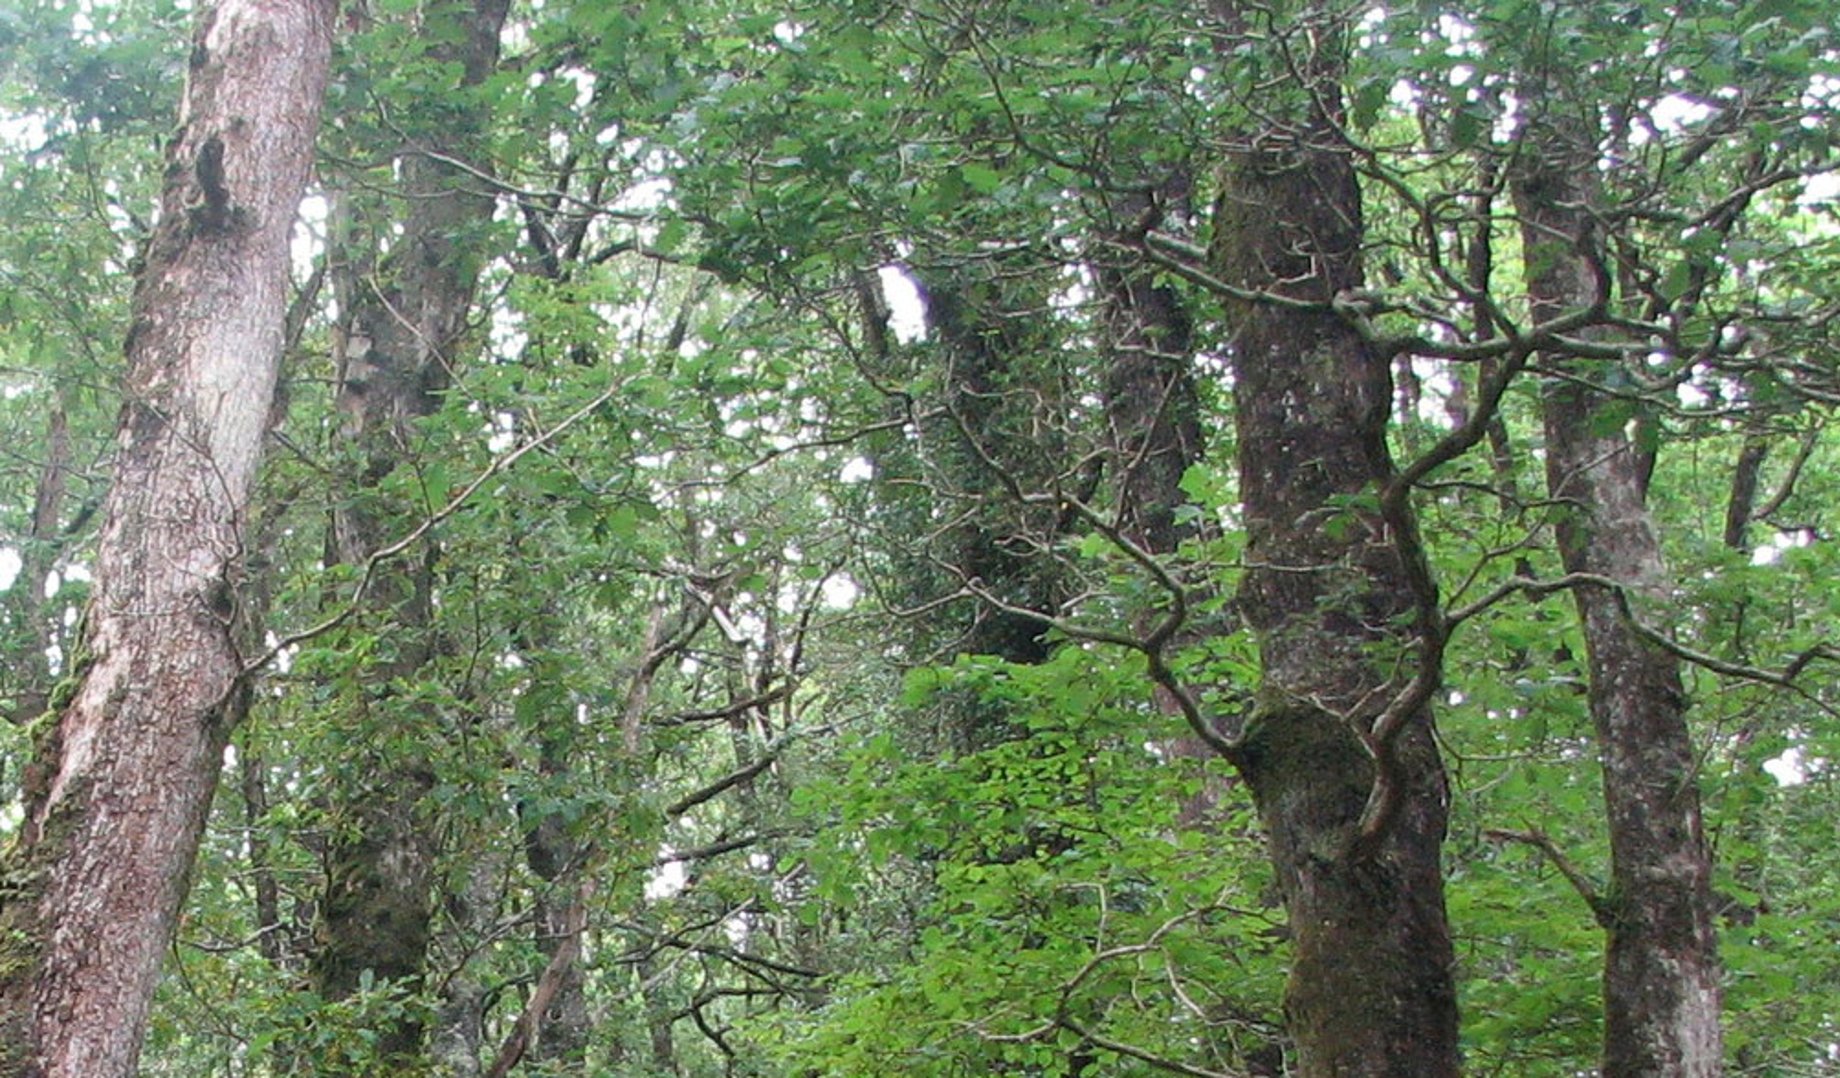 Trees in a forest